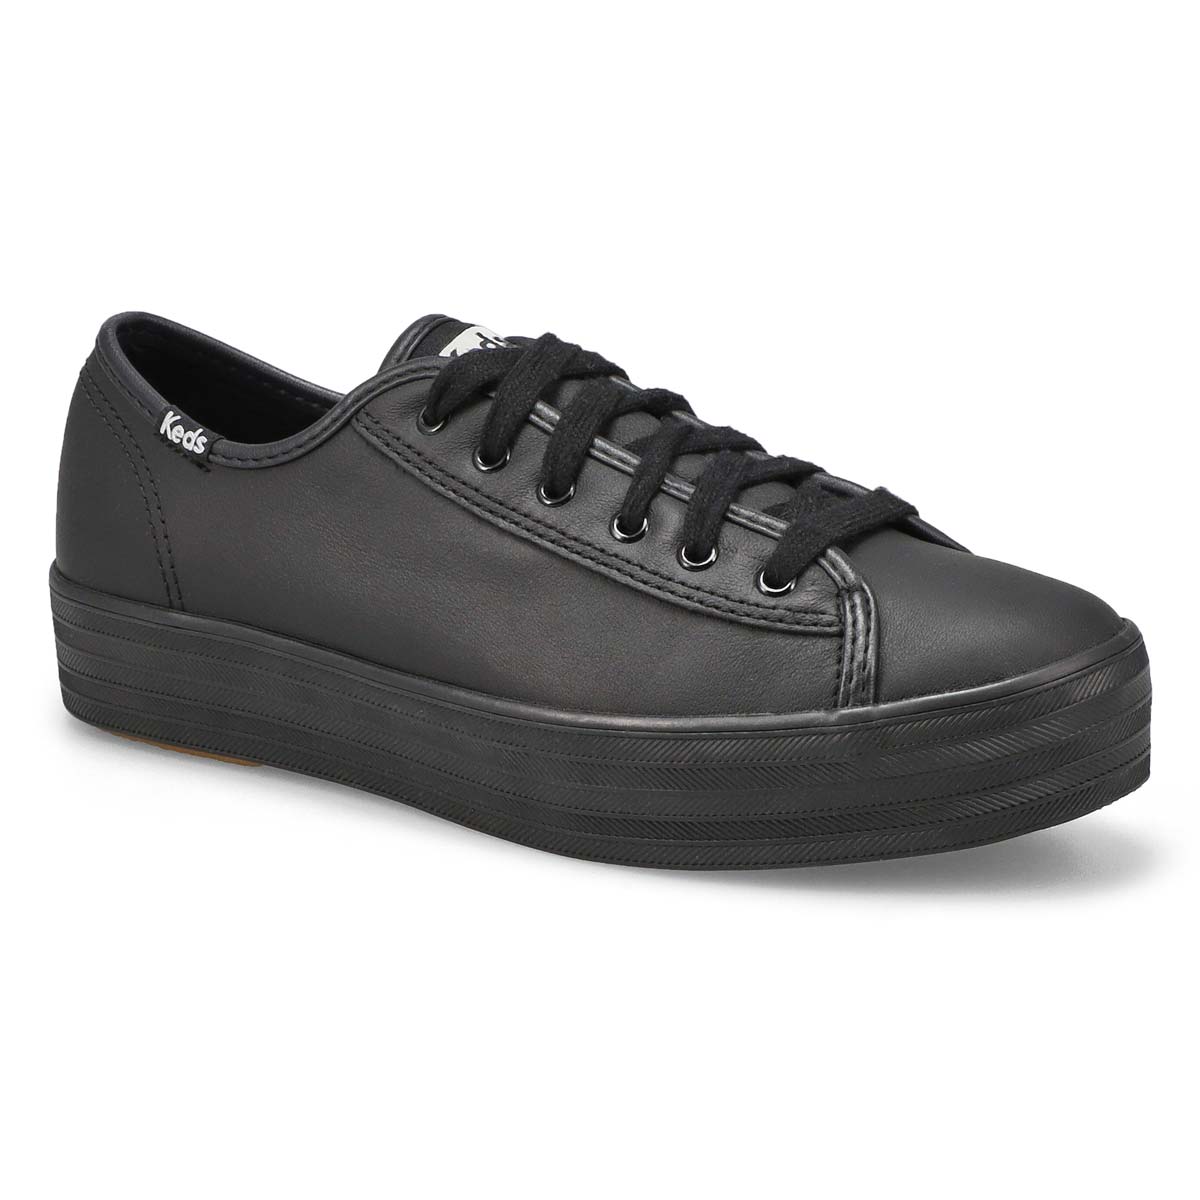 black leather casual shoes womens